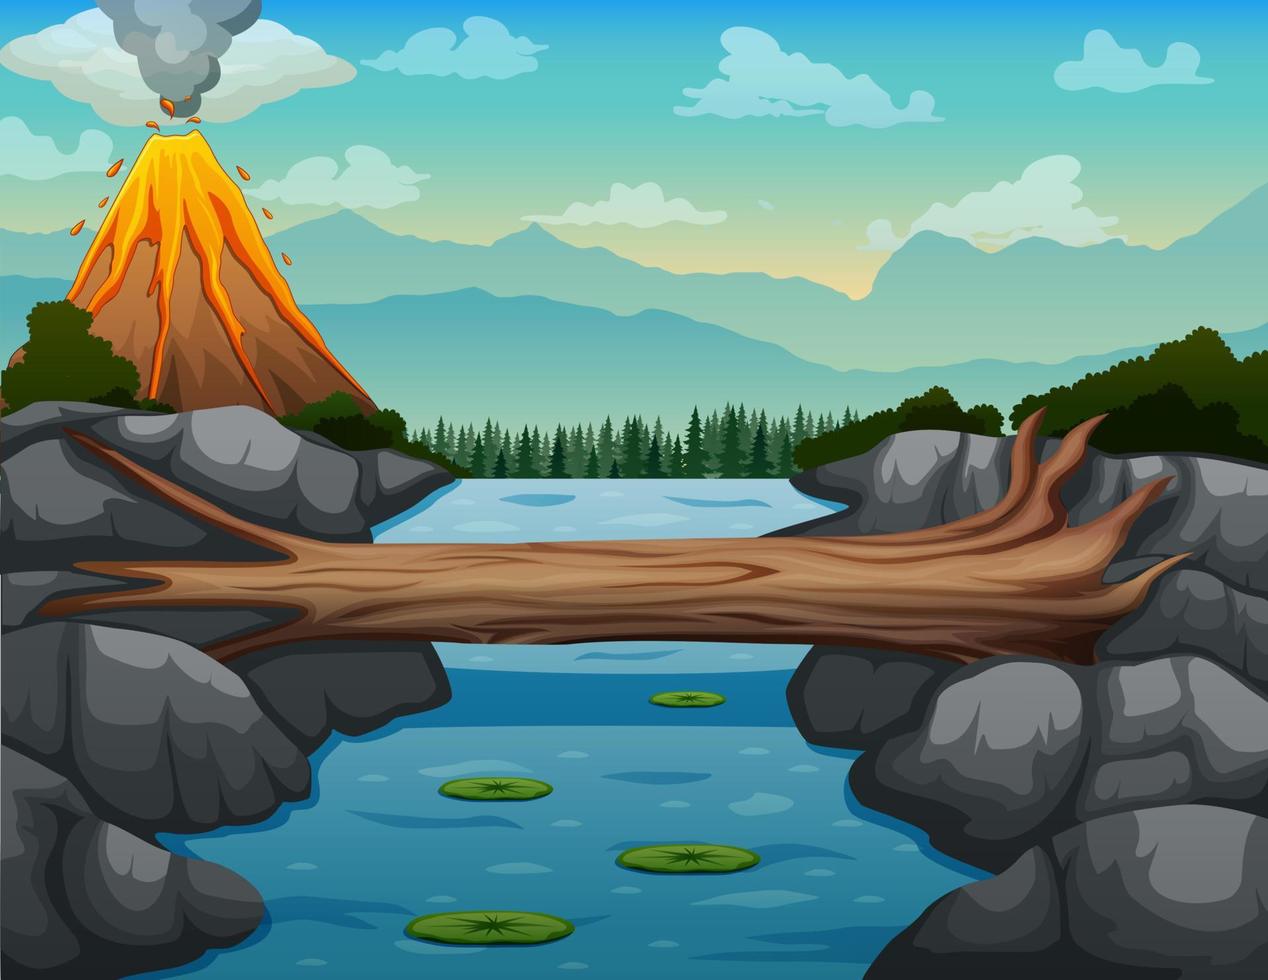 Background scene with a river and volcano erupt illustration vector